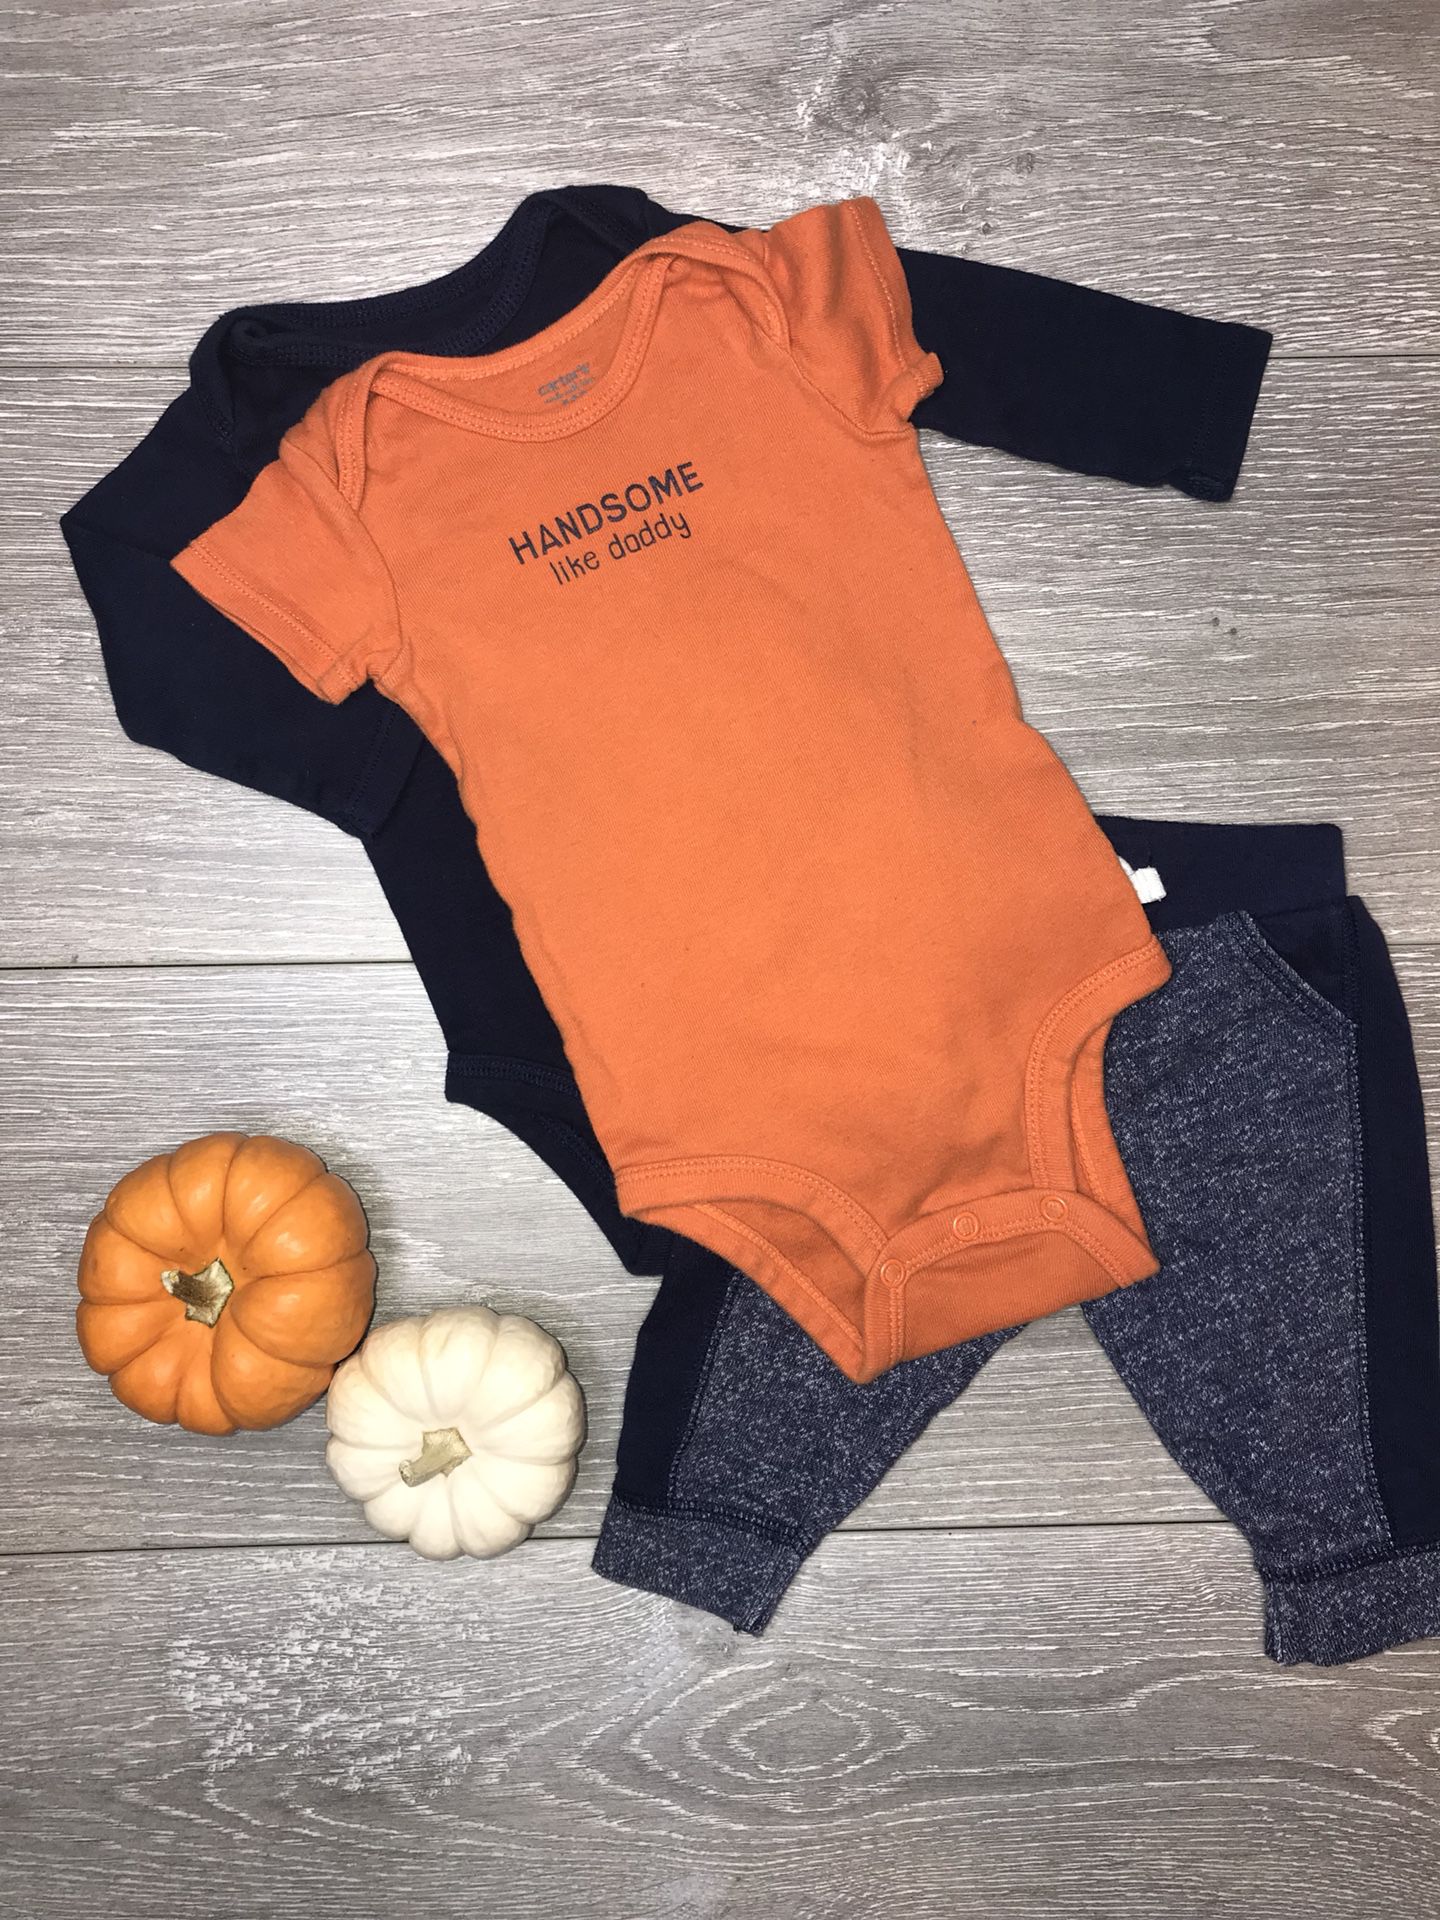 Baby Boy Clothing 6 Months $3.50 (Pending Pickup)